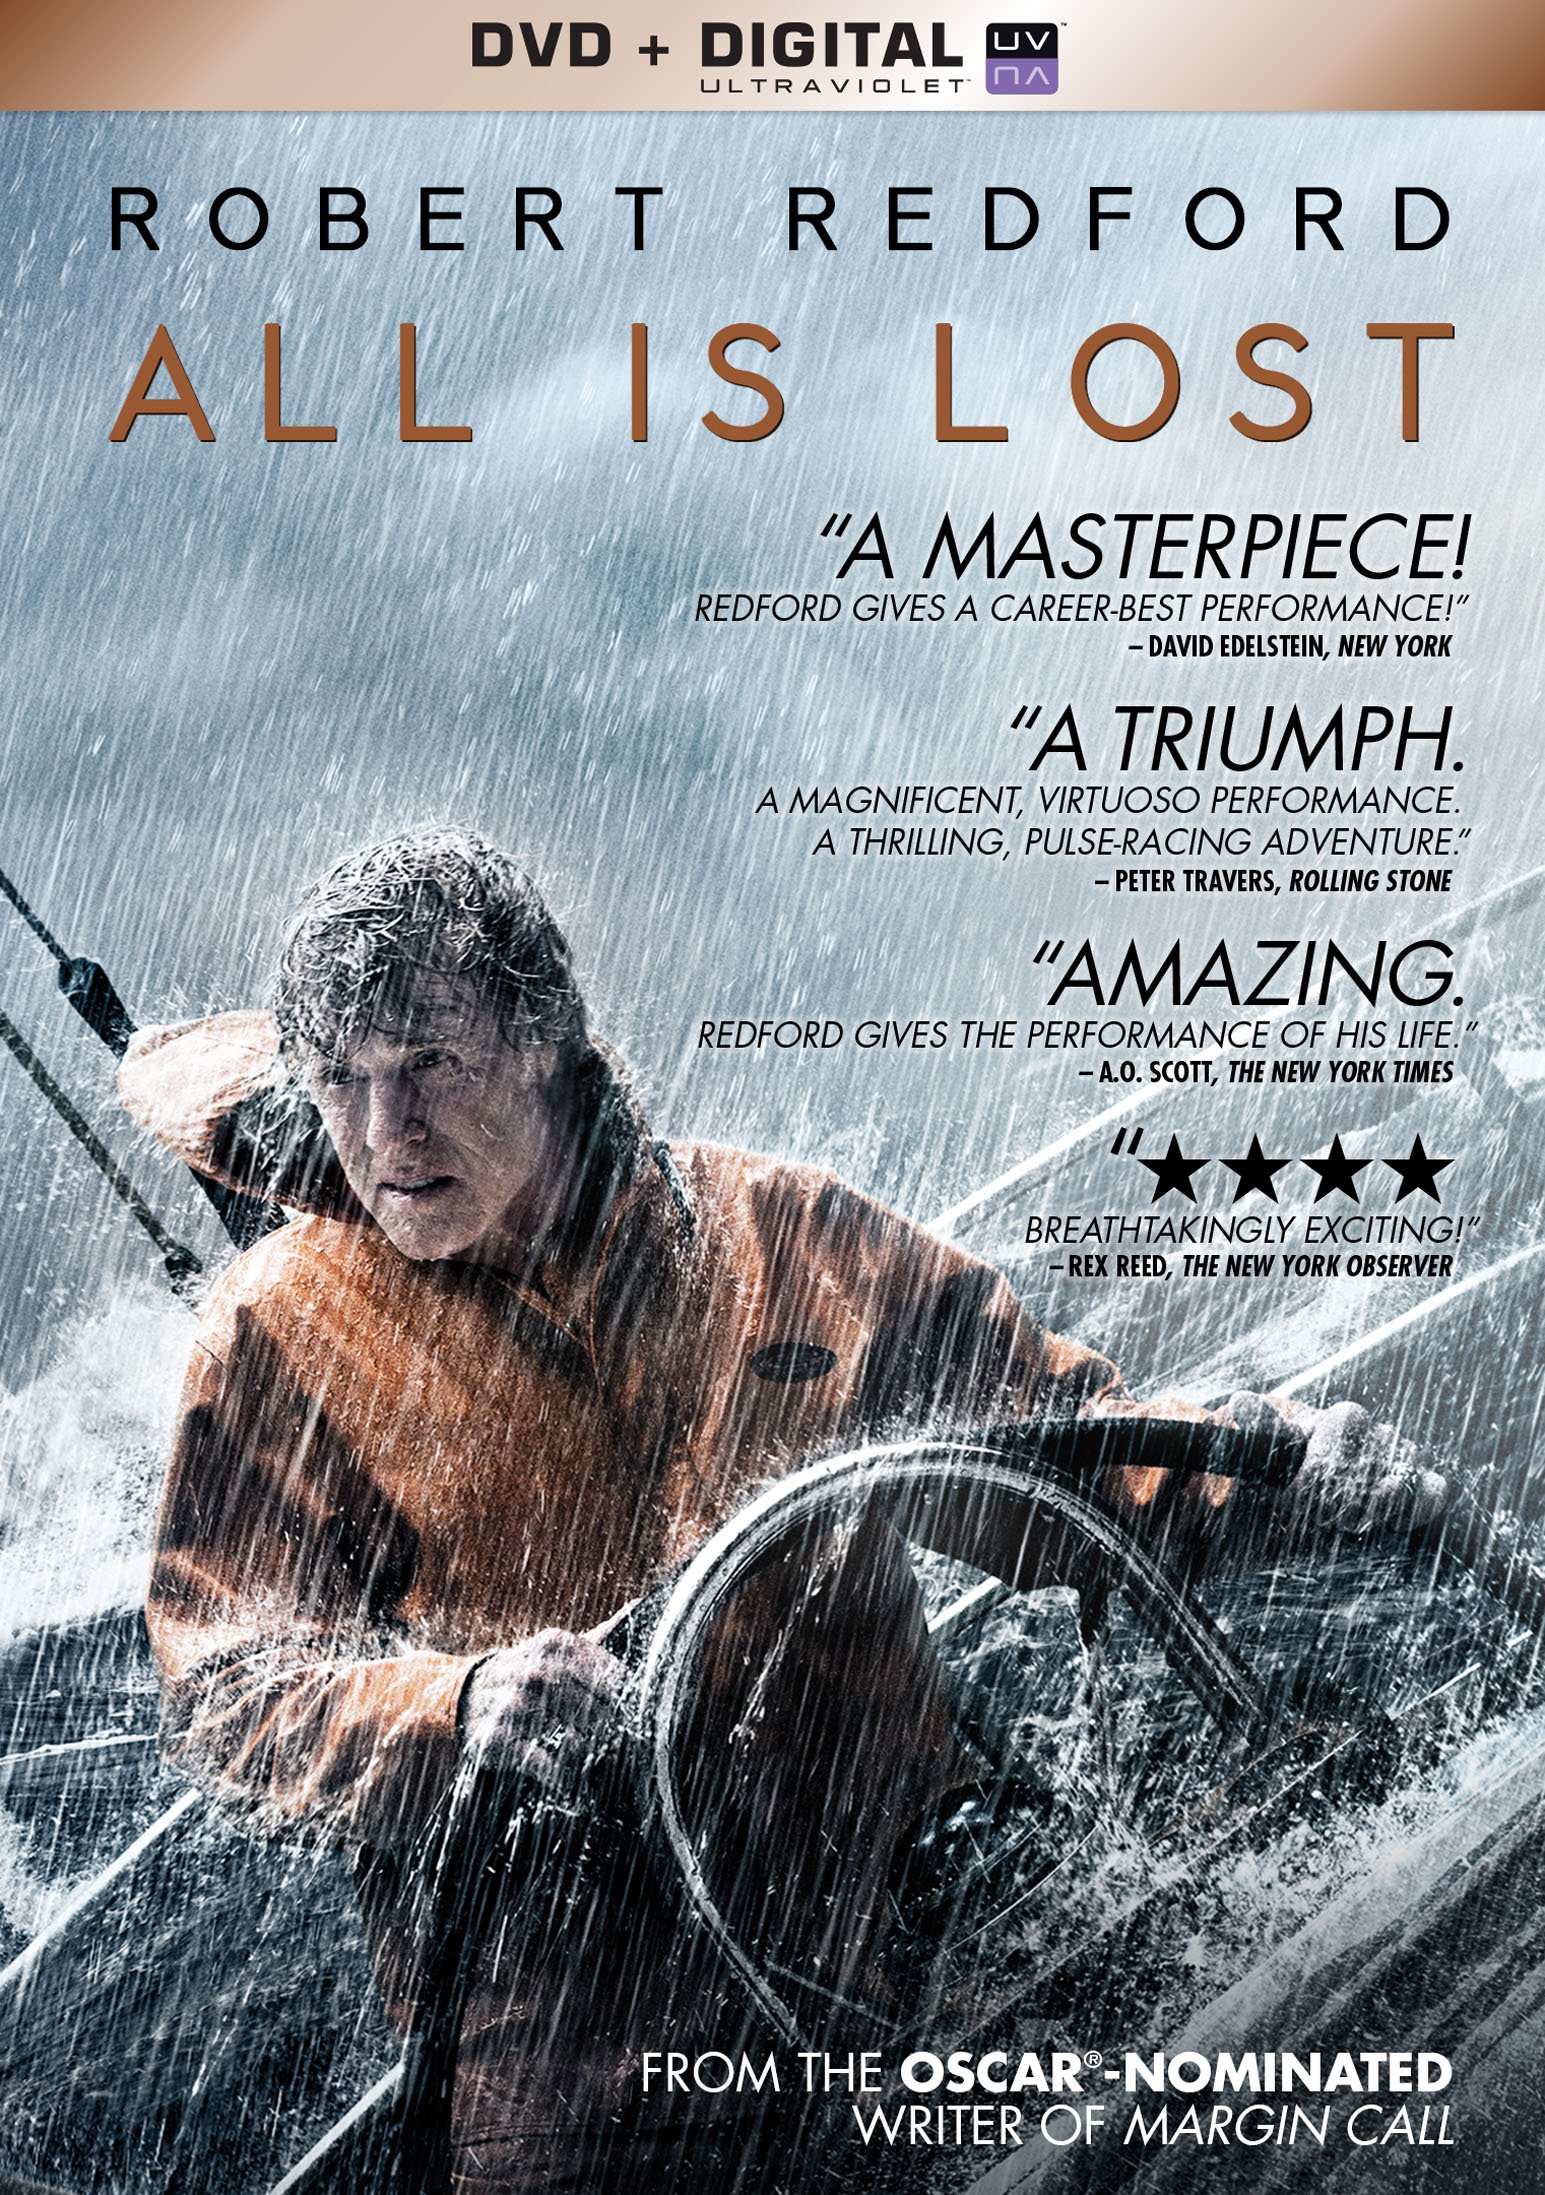 all is lost dvd release date february 11, 2014